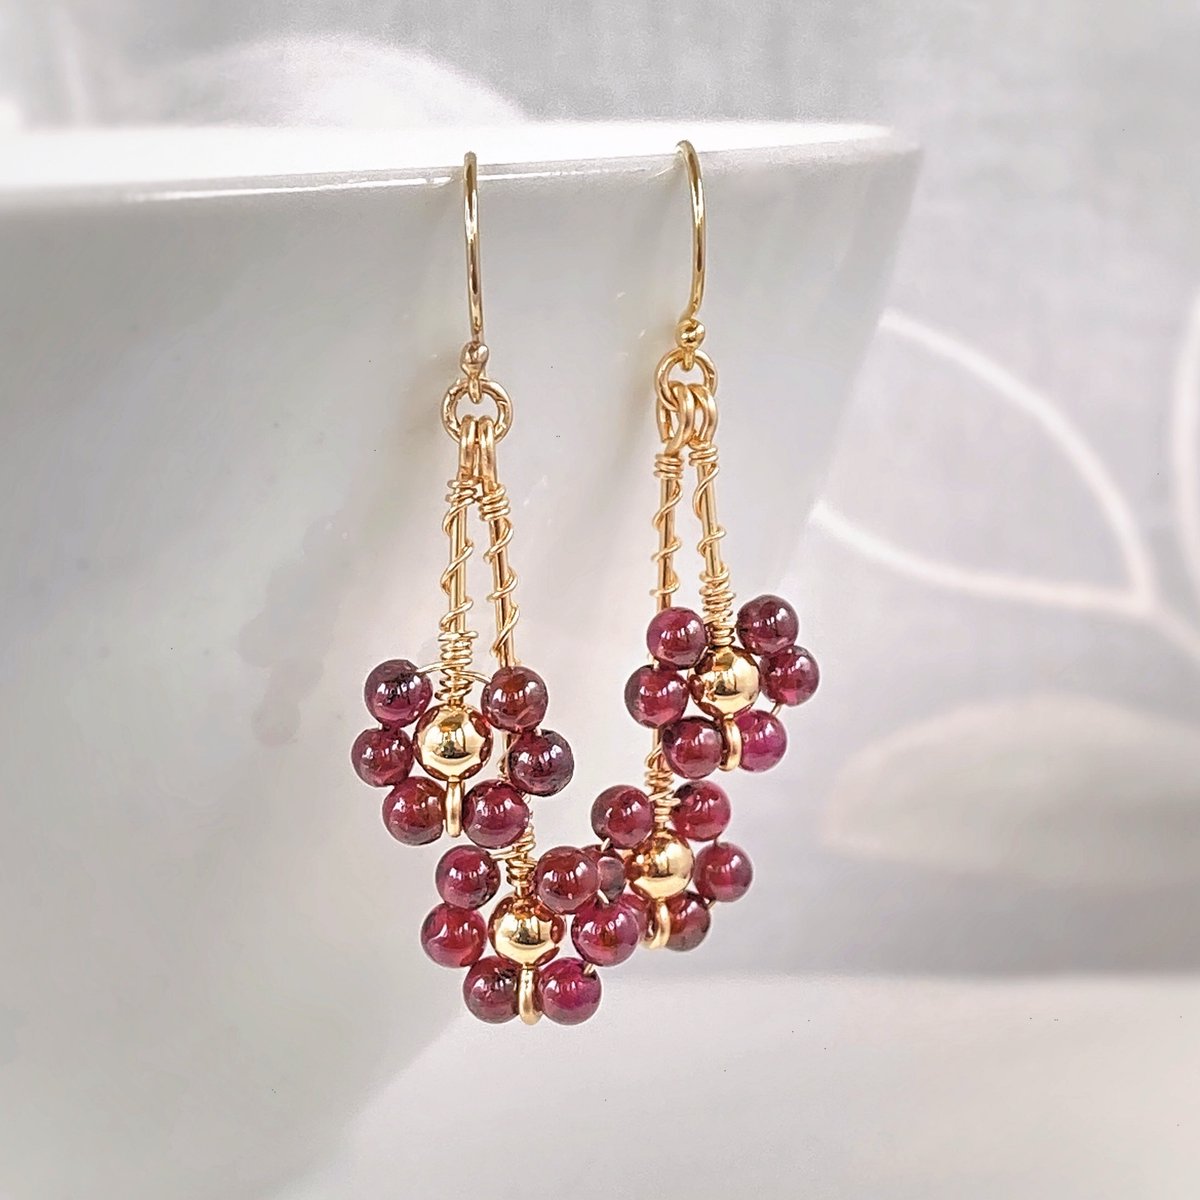 Lovely pair of #GarnetEarrings with #14K #GoldFilled wire wrapped red garnets and gold filled beads, 1.75'L. 

etsy.com/listing/138108…

#JanuaryBirthstone #RedGarnets #14KGoldFilled #MariesGems #GiftsForHer #ShopSmall #Red GarnetEarrings #GarnetFlowers #FlowerEarrings